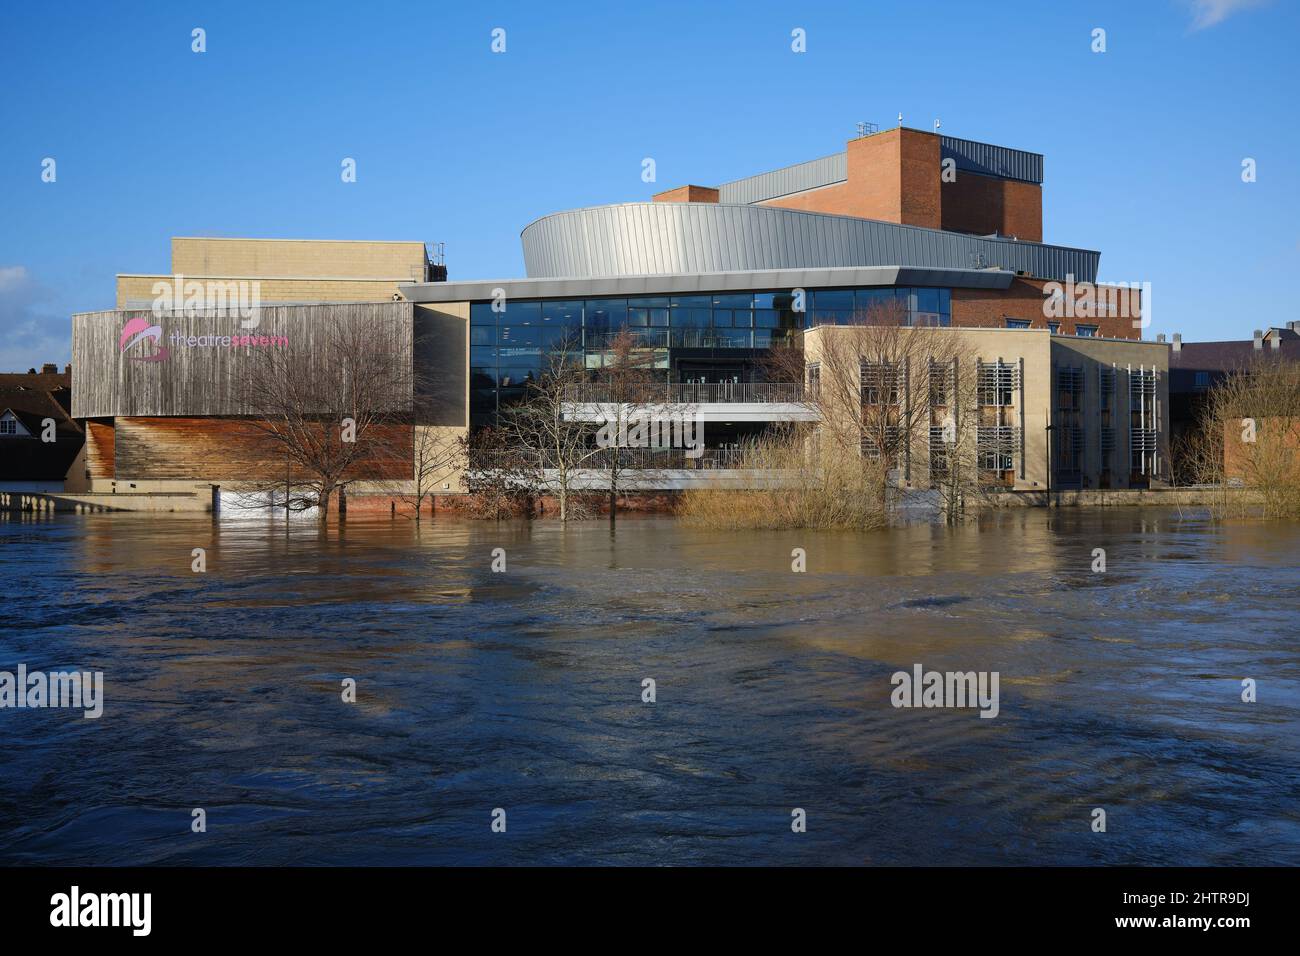 Theatre Severn and high water levels on the River Severn in Shrewsbury, UK Stock Photo